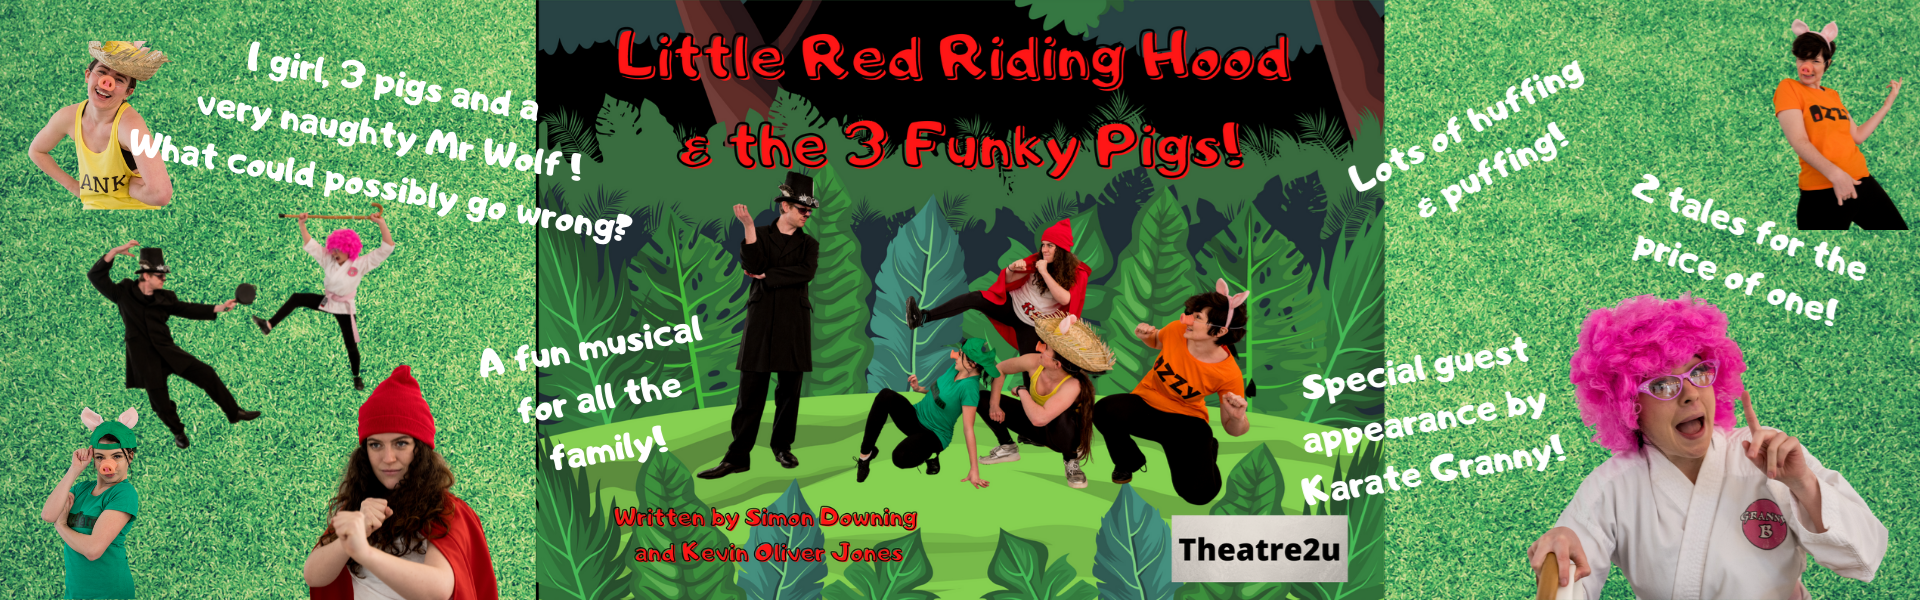 Outdoor Theatre - Little Red Riding Hood & The Three Funky Pigs